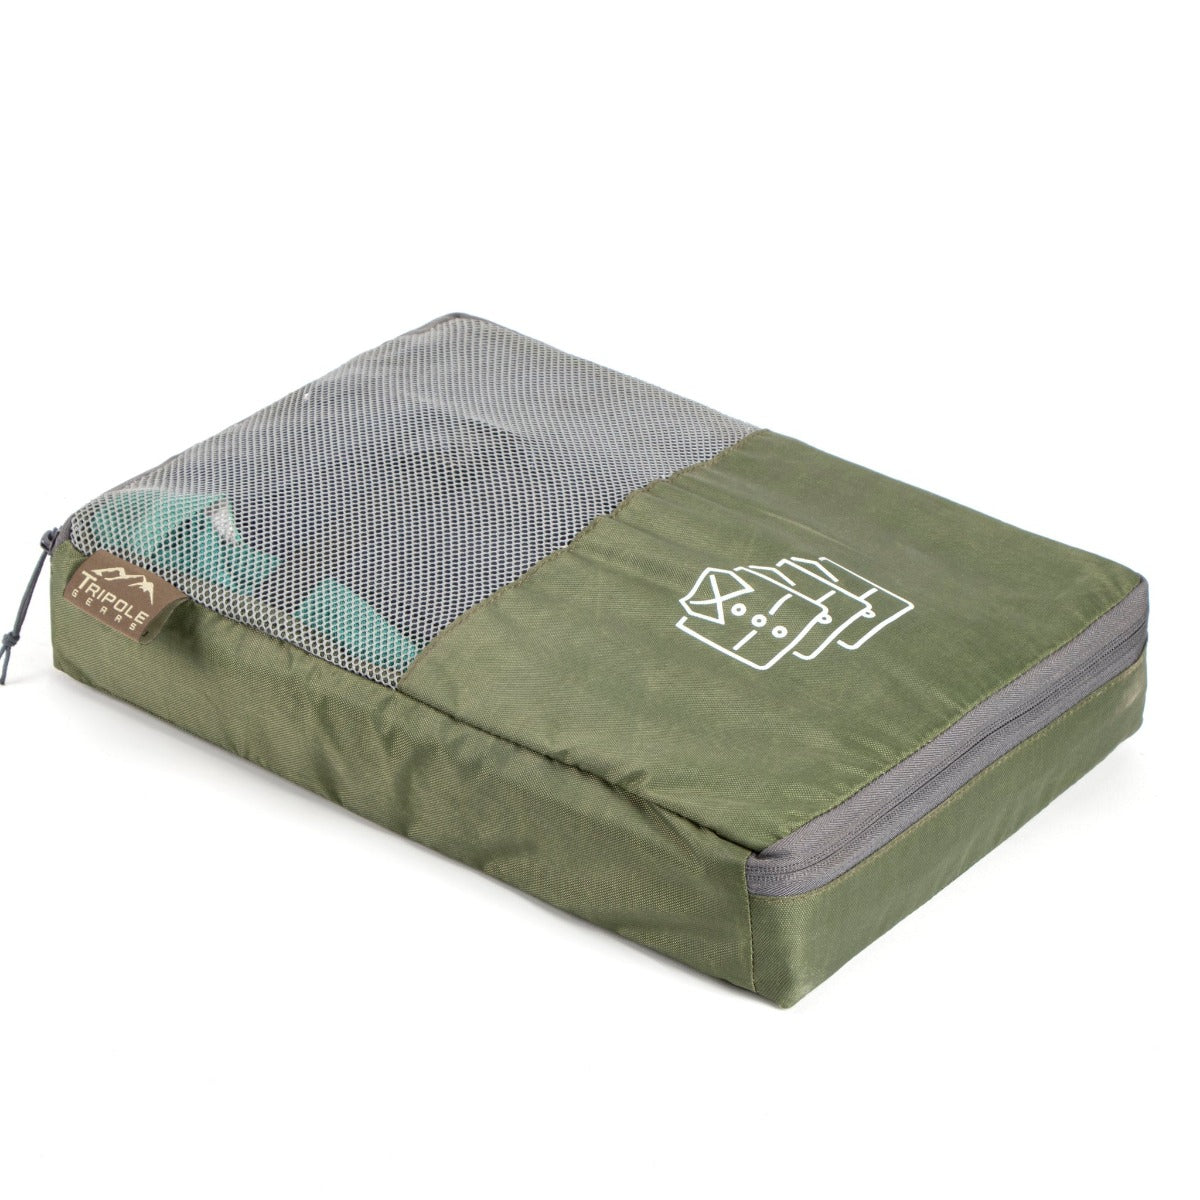 Organizer Packs - Cylindrical & Rectangle Shaped - Set of 6 - Army Green 5